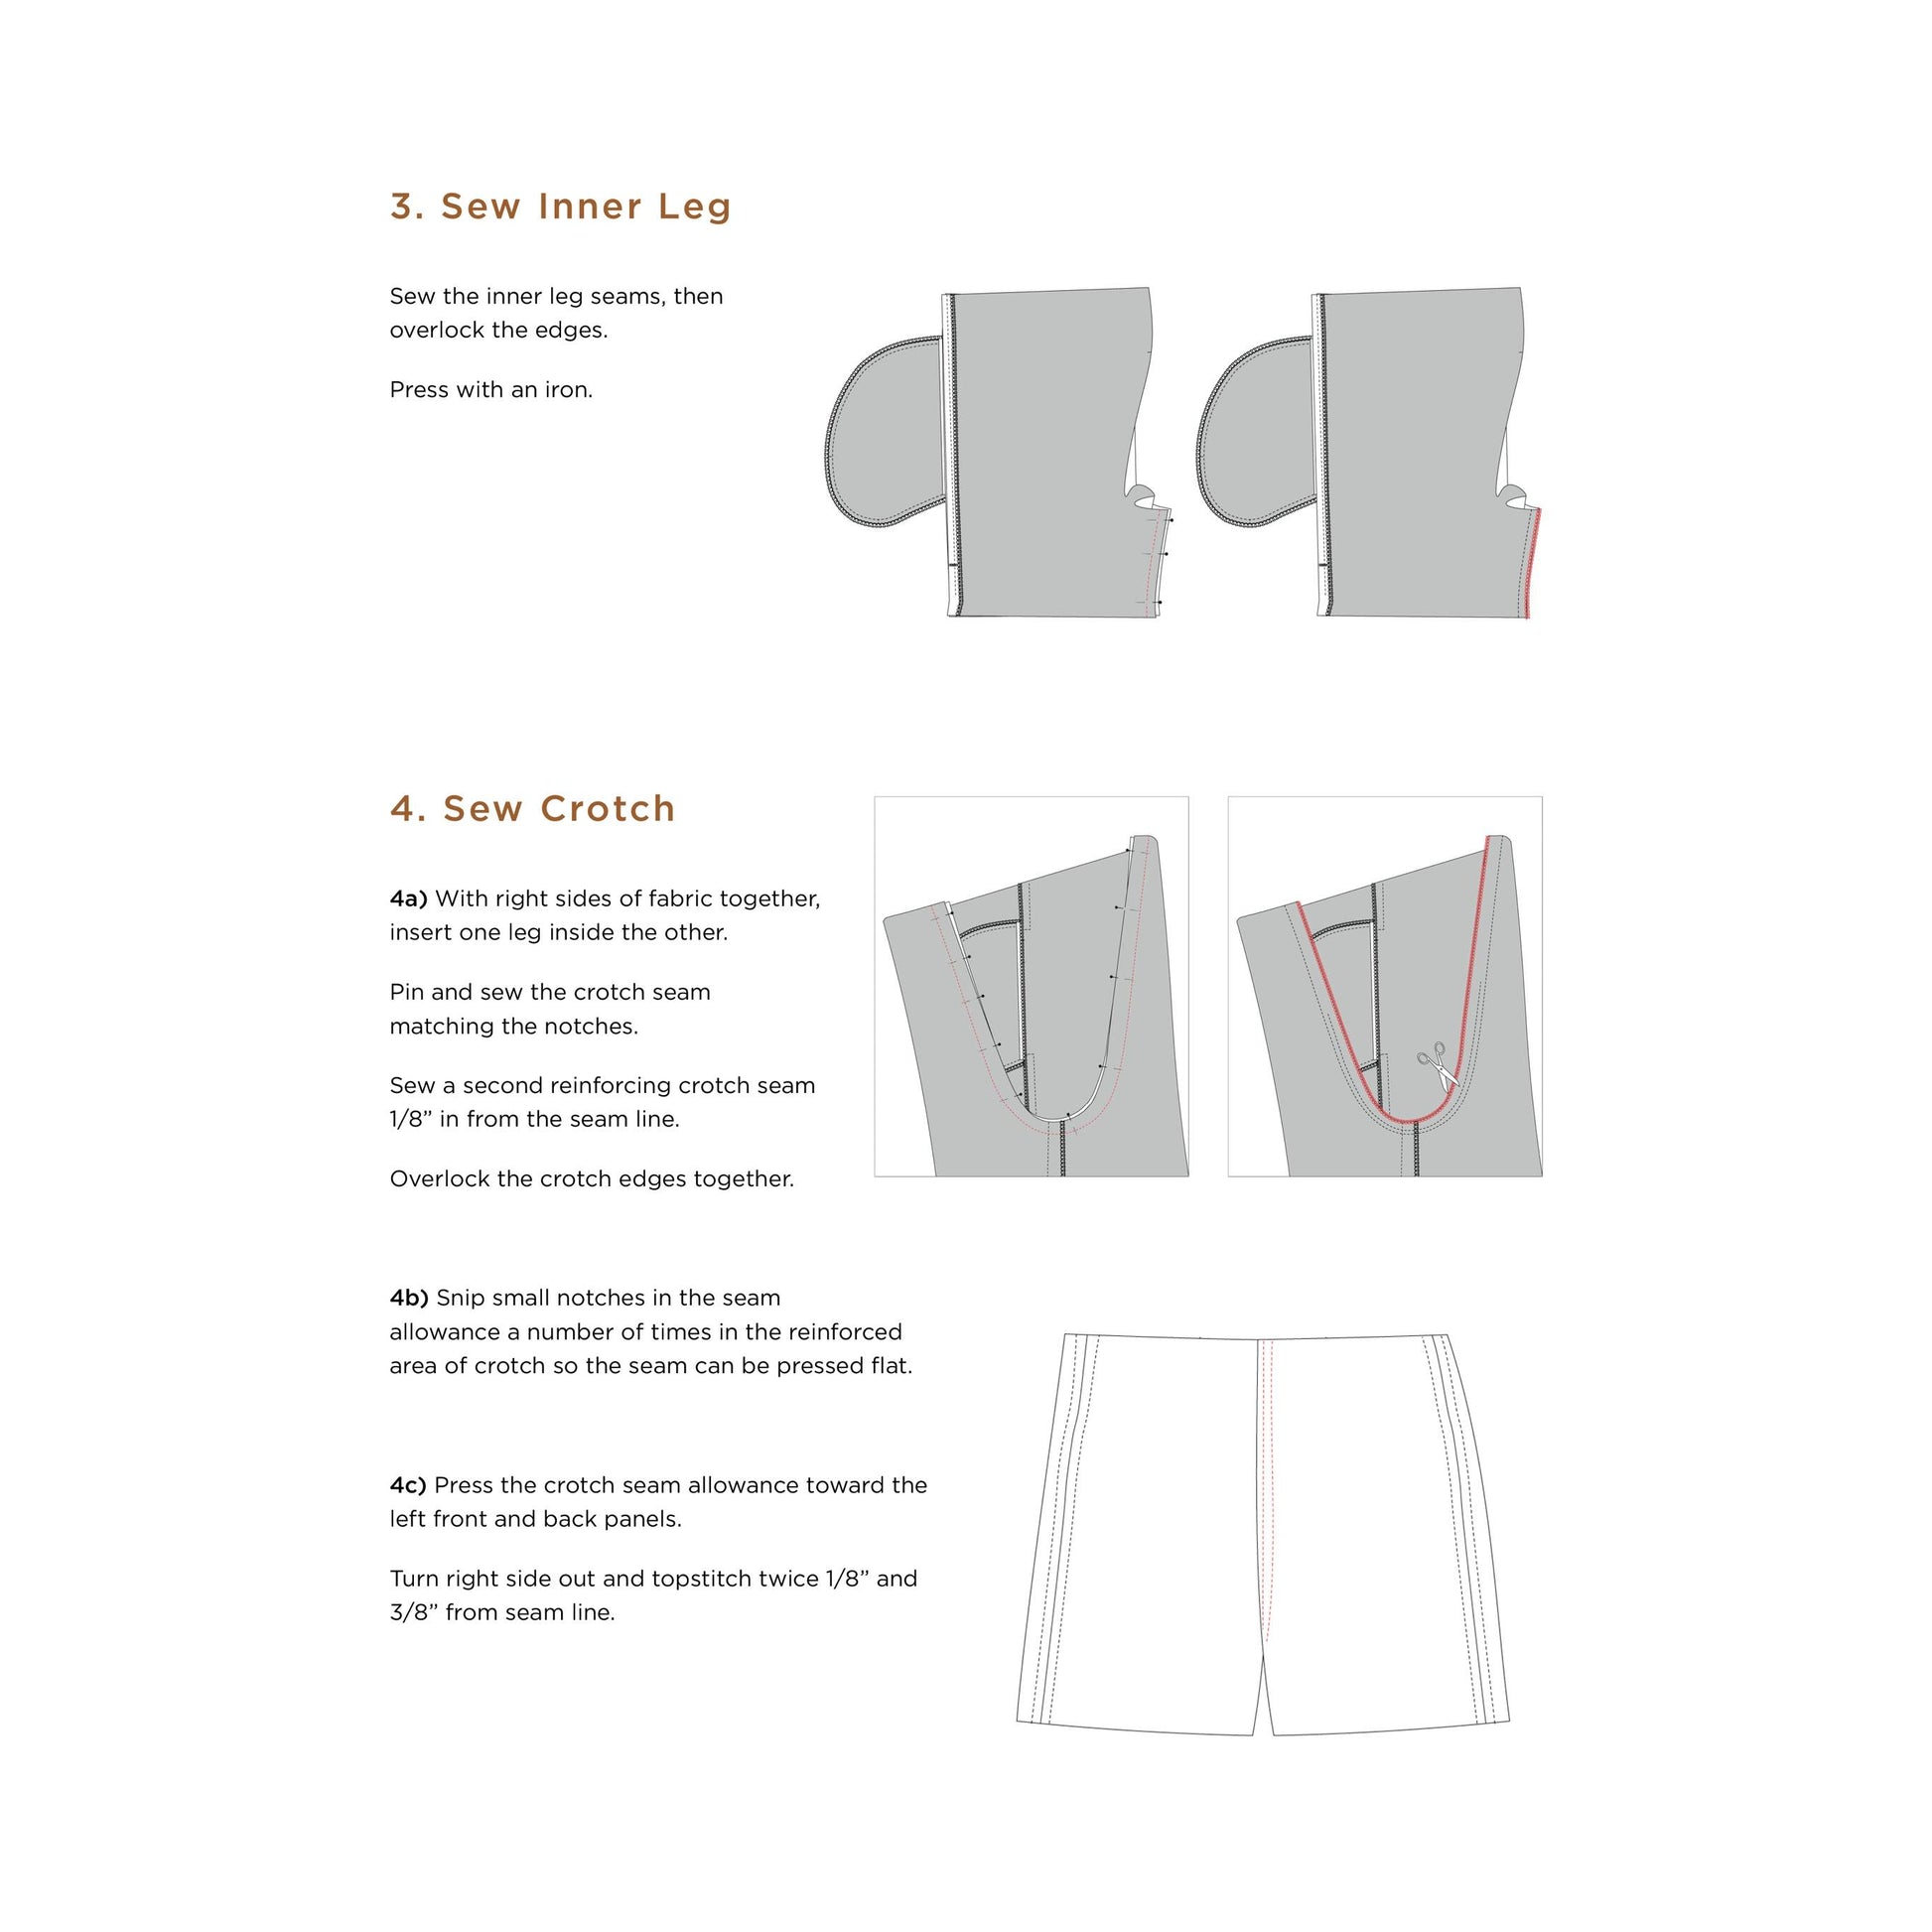 Sweatpants pattern sewing instructions for ladies, XS-XXXL